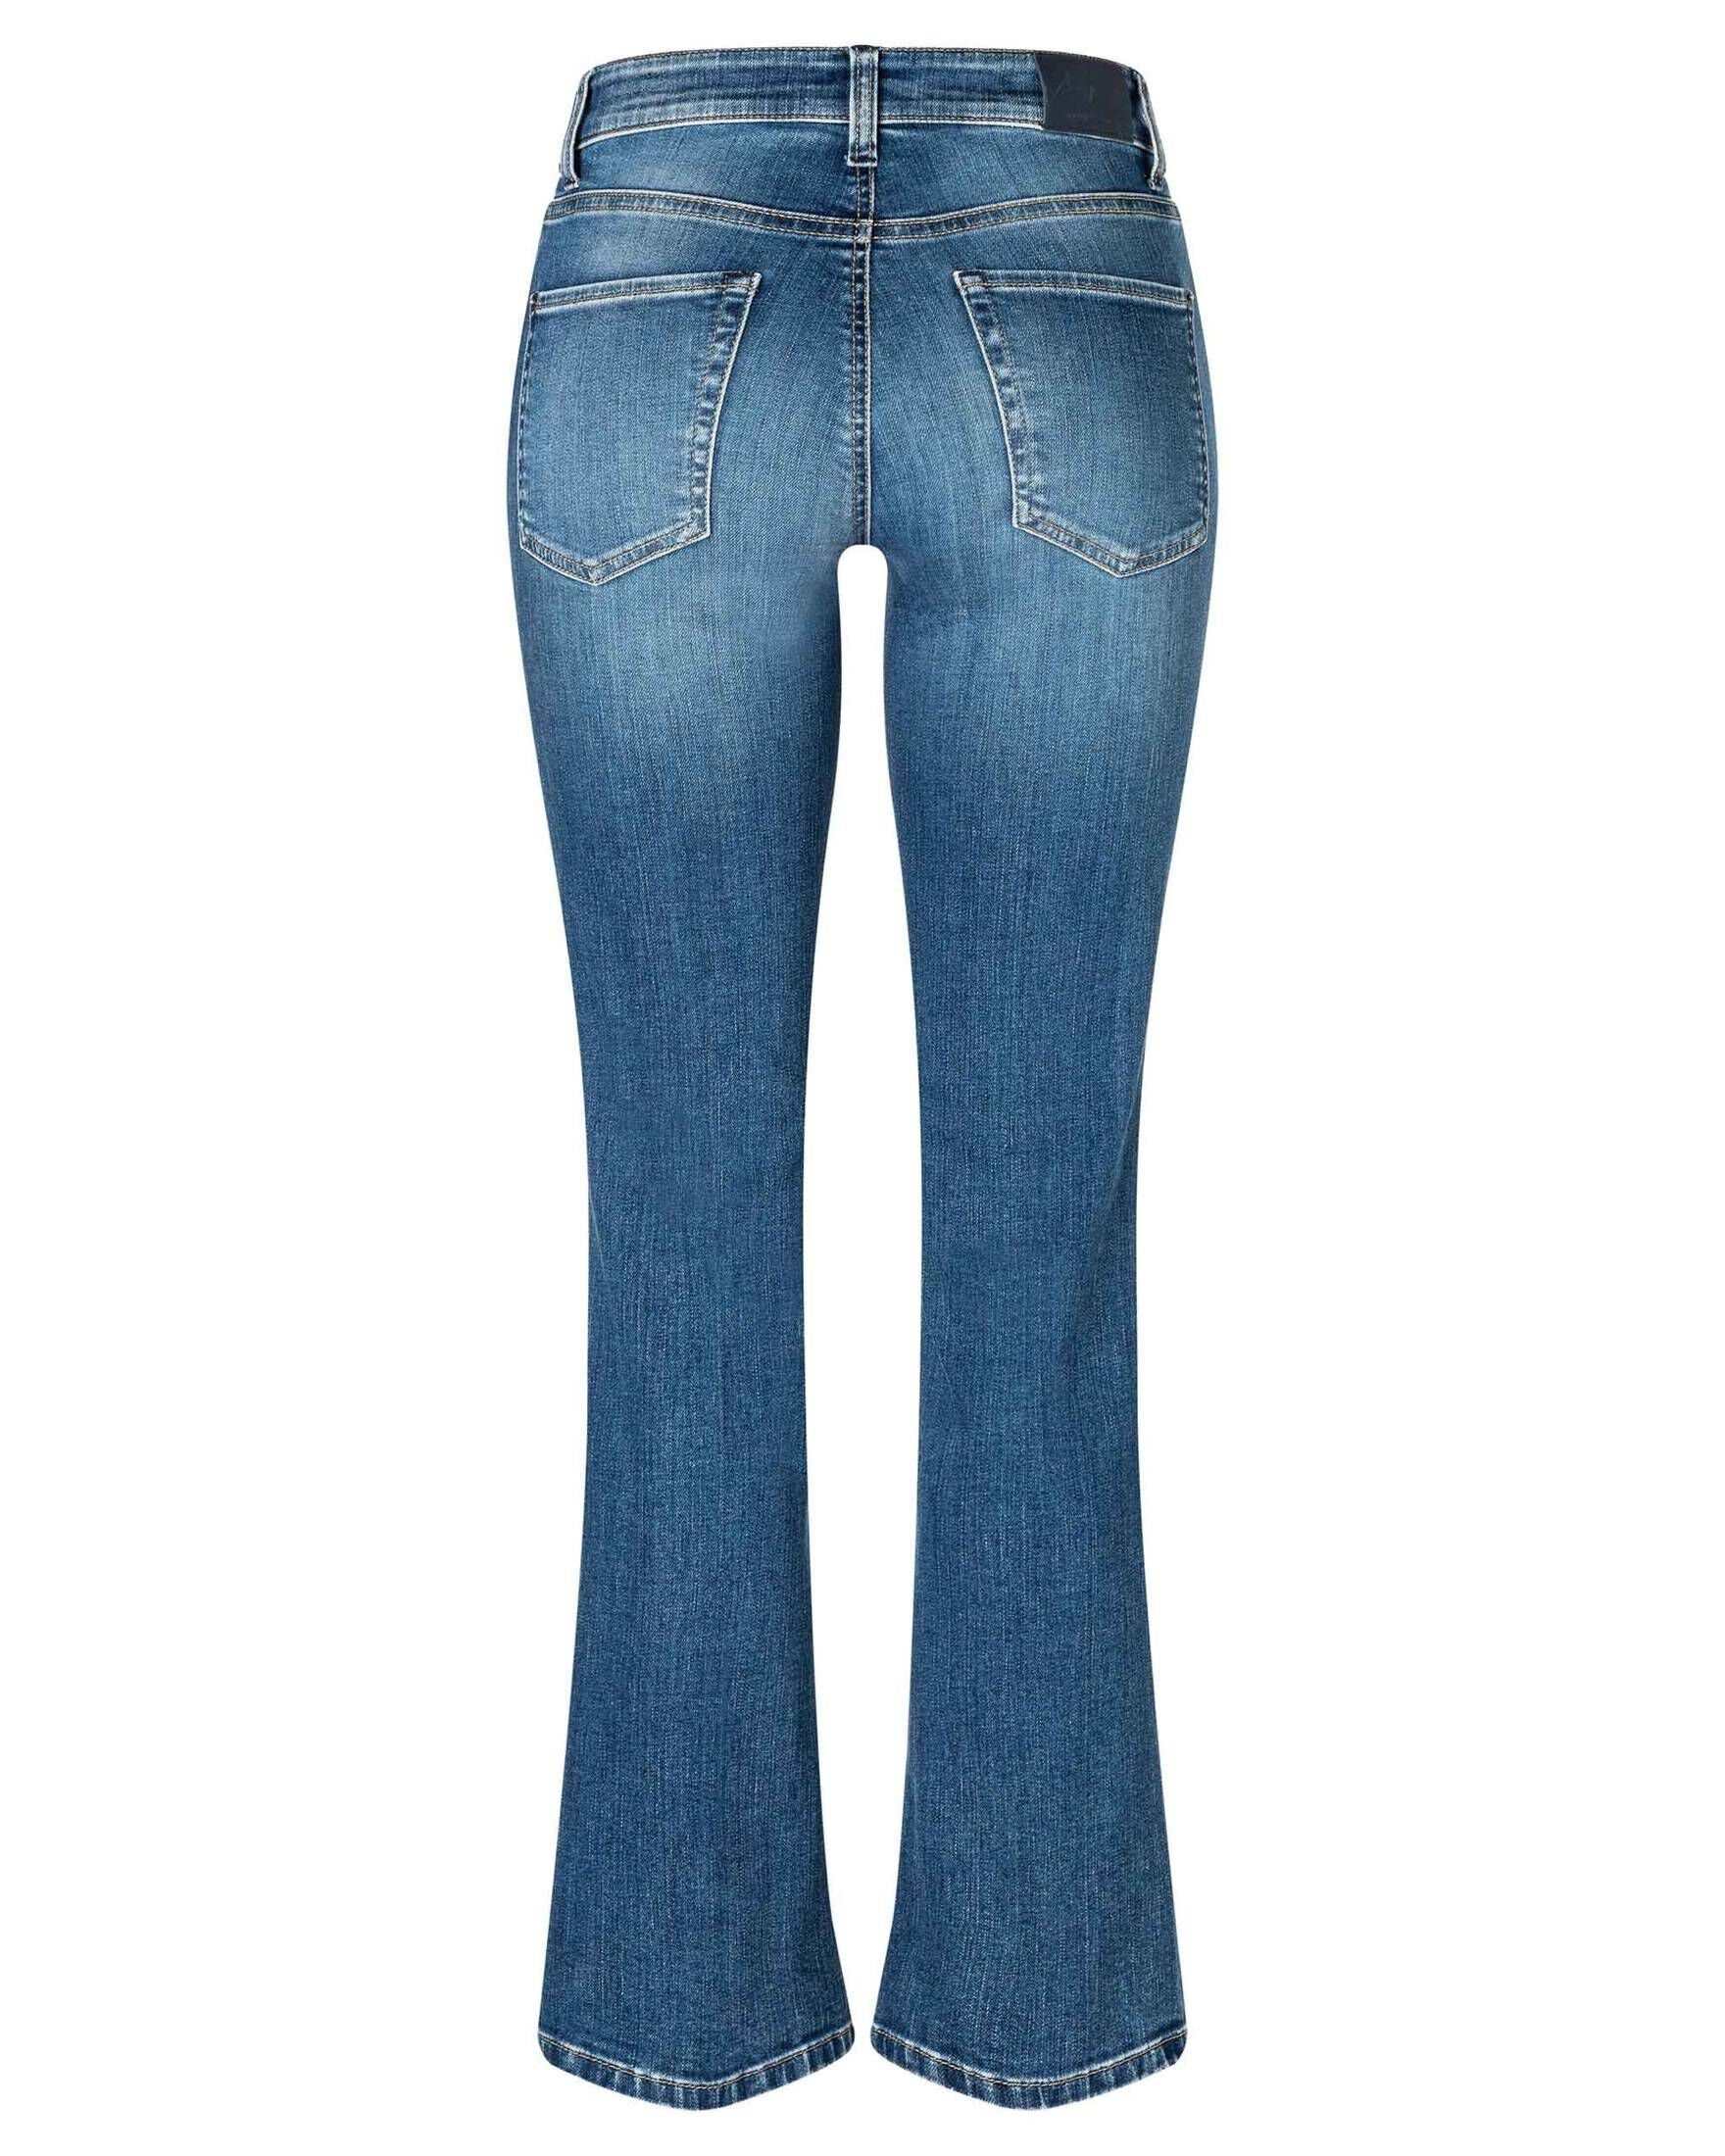 Damen 5-Pocket-Jeans Bootcutjeans Cambio (1-tlg)